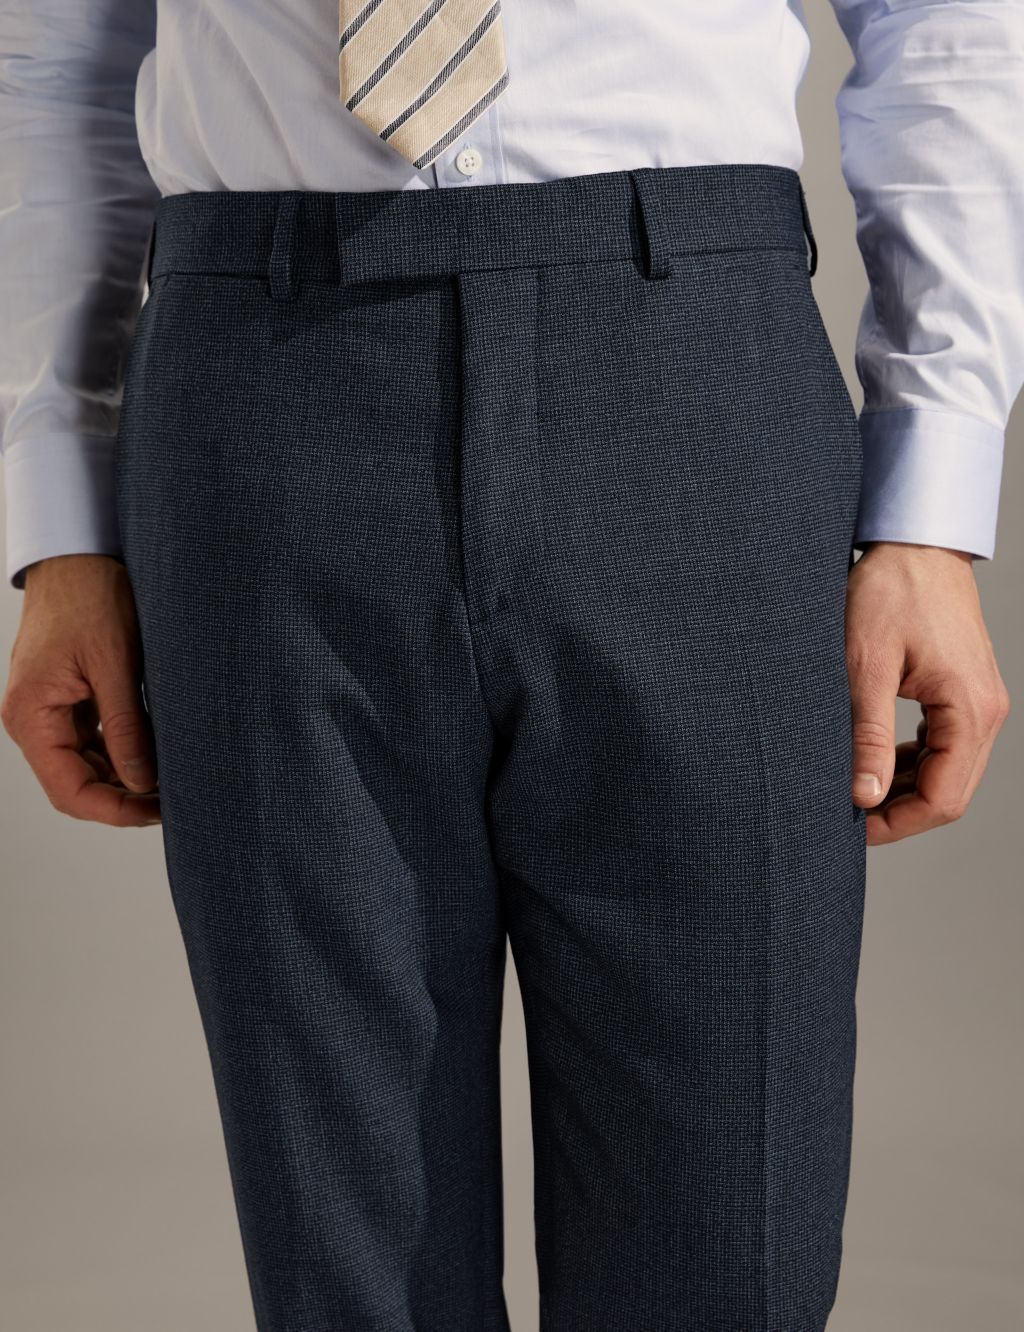 Tailored Fit Bi-Stretch Puppytooth Trousers image 3